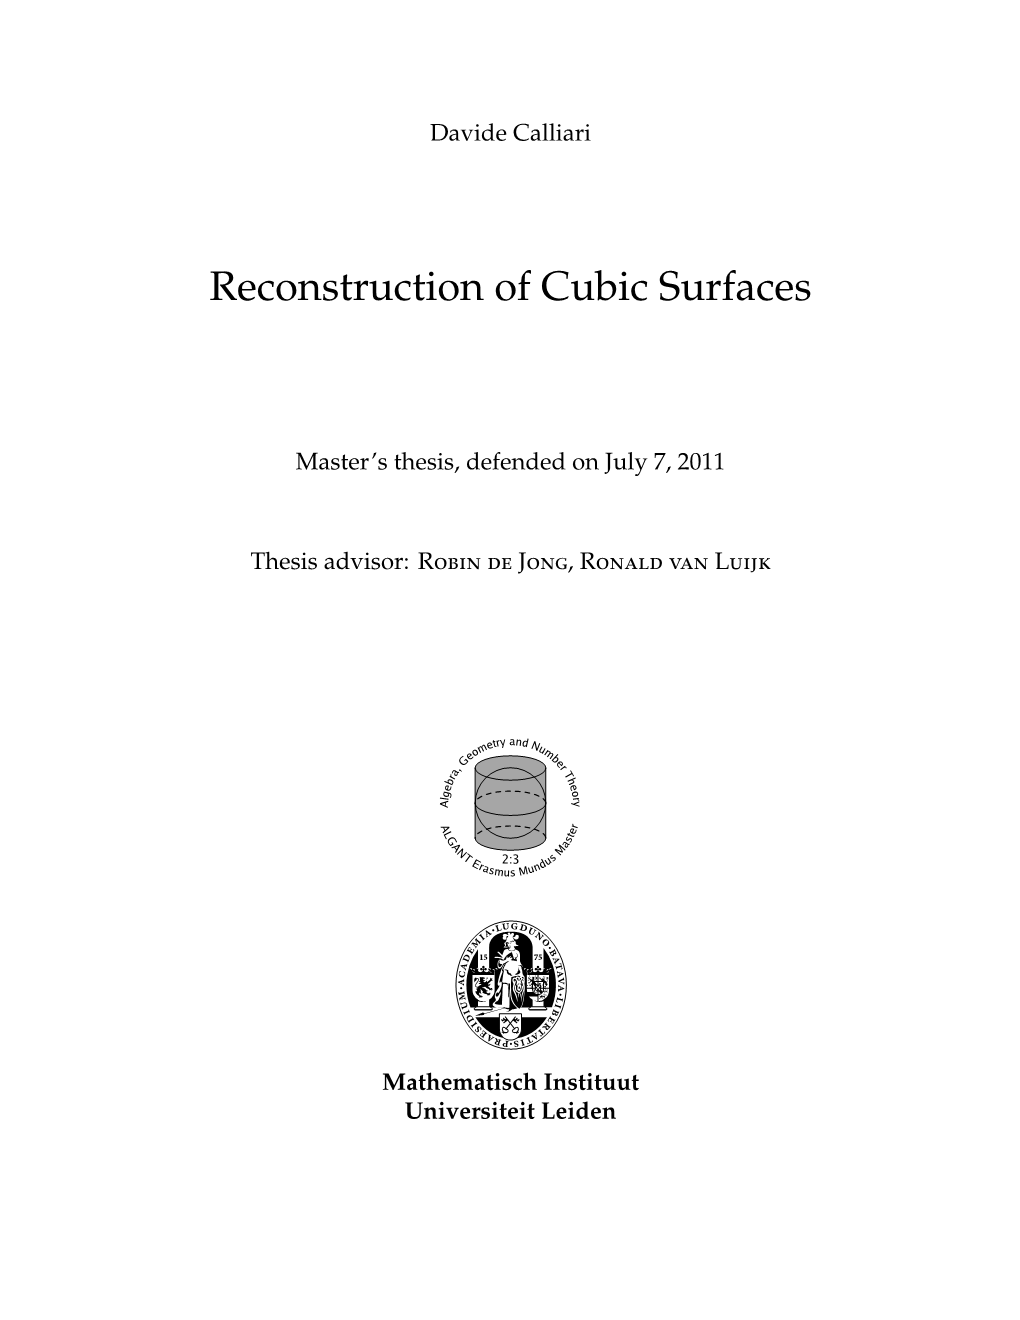 Reconstruction of Cubic Surfaces